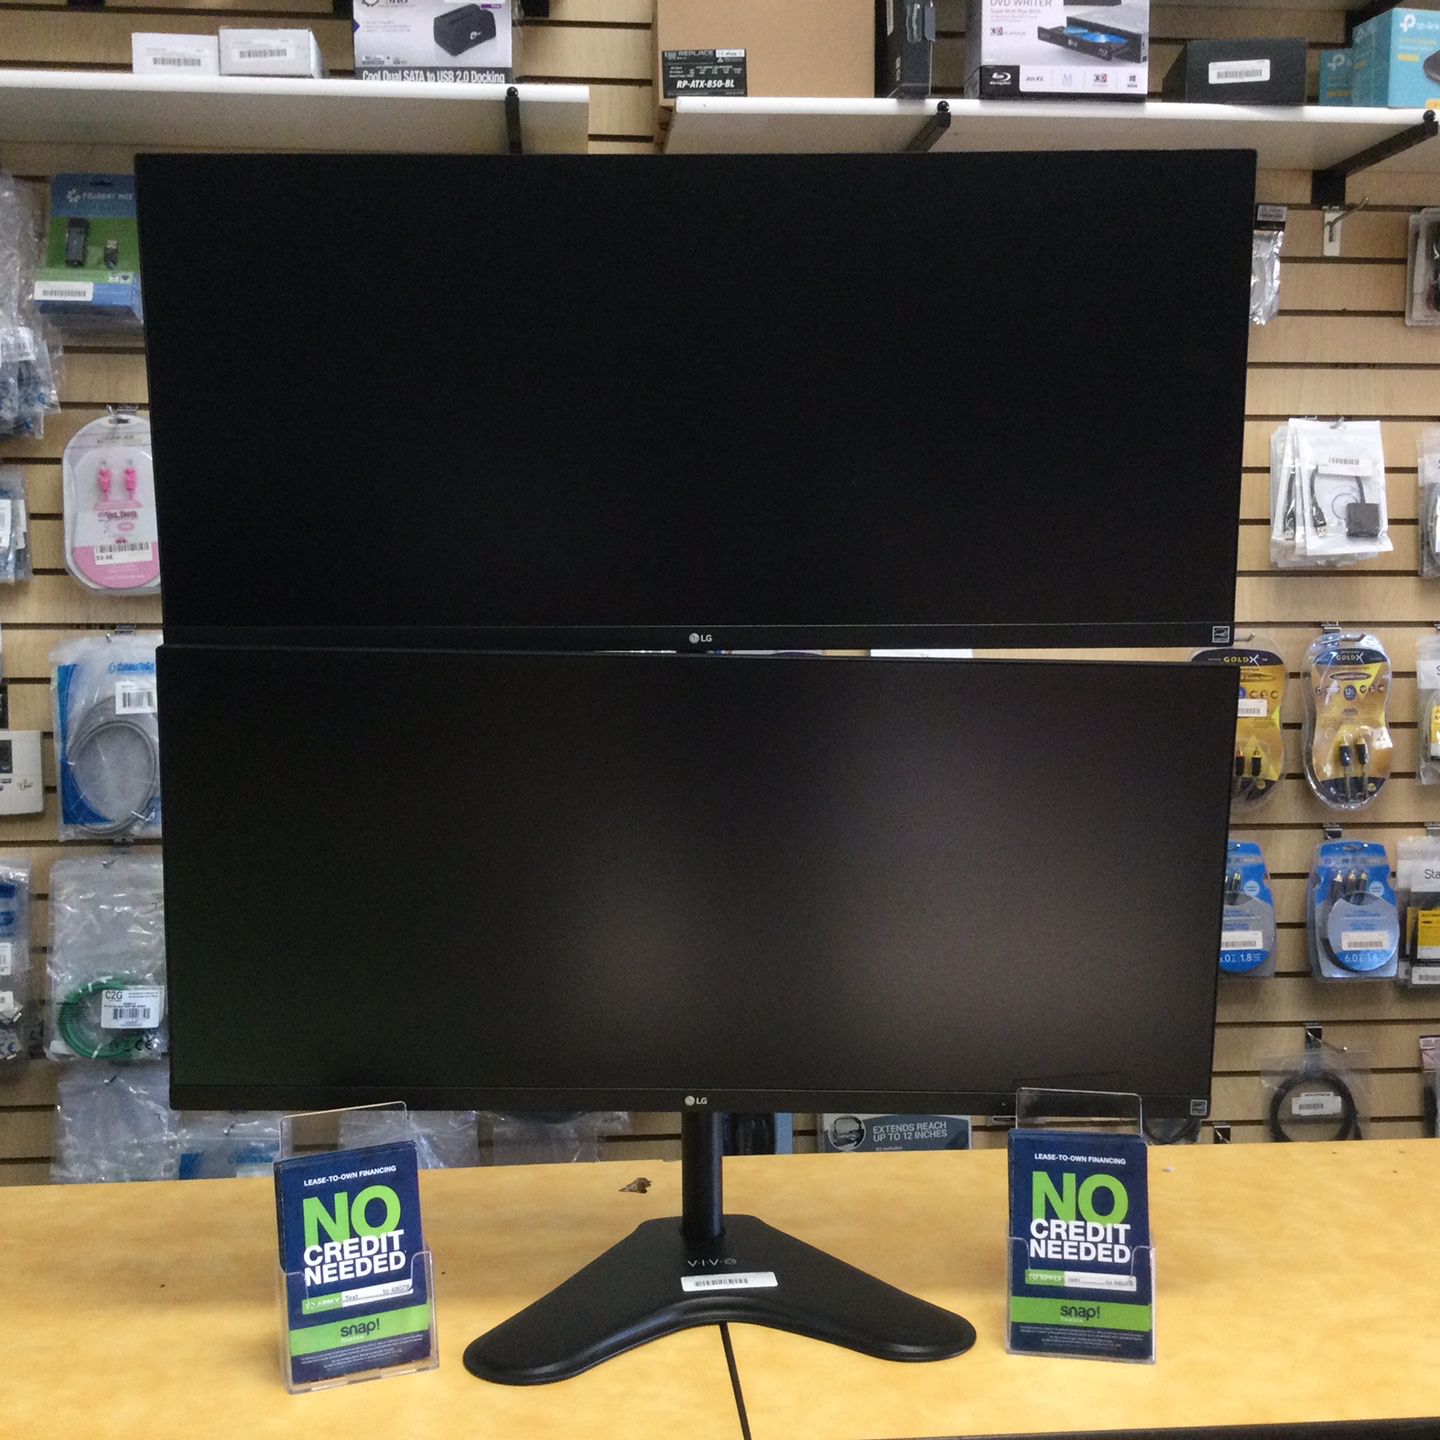 Monitor Mount With 2x 34” LG Ultrawide Monitors - $0 DOWN!